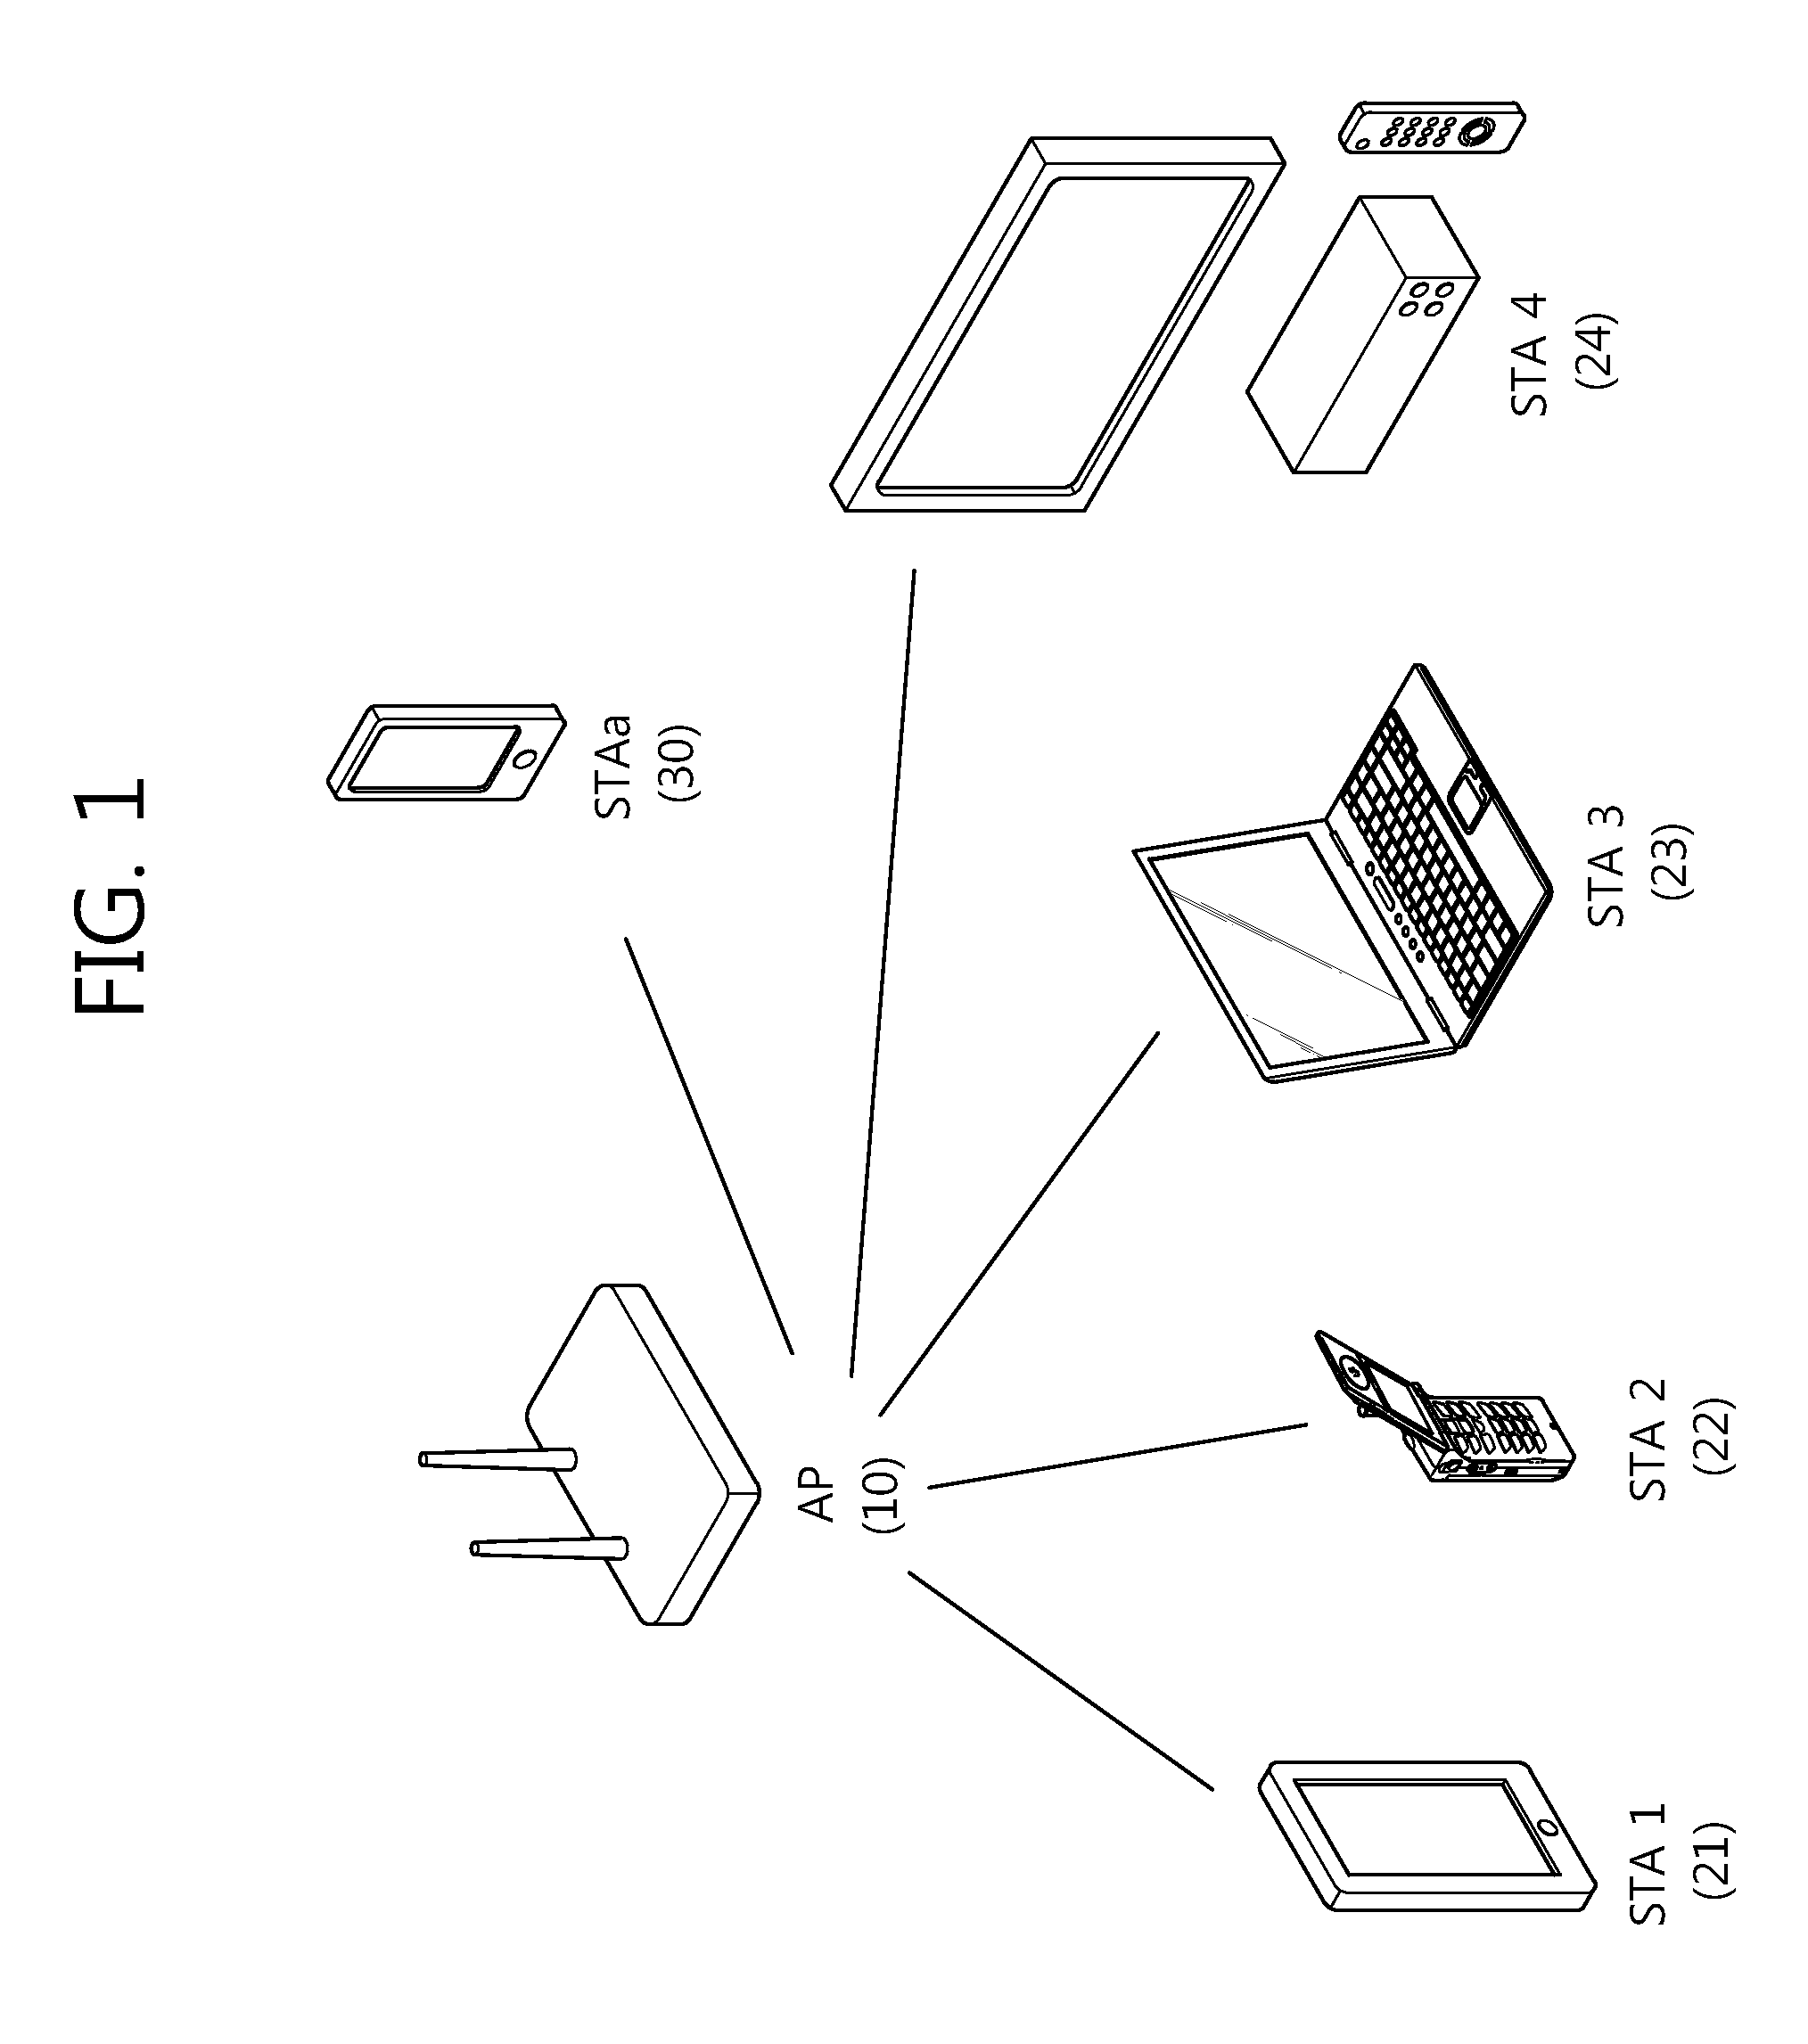 Grouping-based data transceiving method in wireless LAN system and apparatus for supporting same